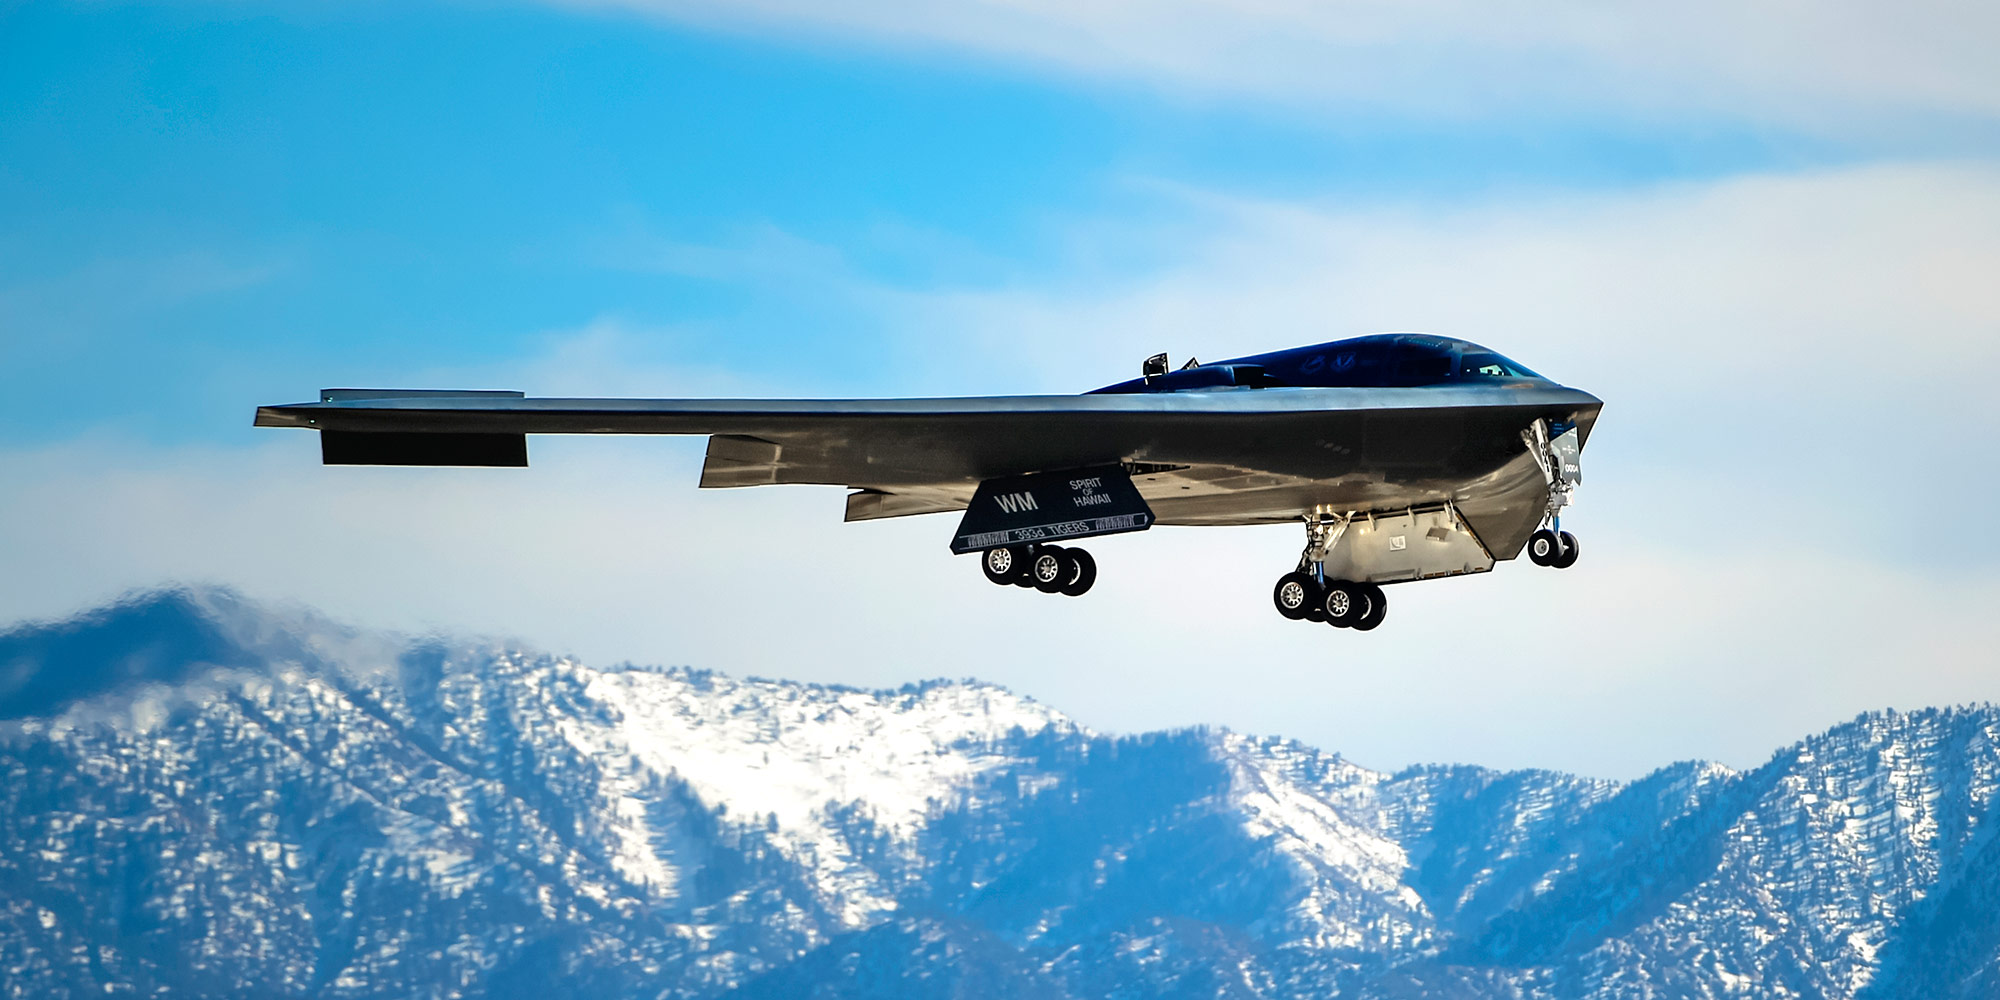 B-2 Spirit Stealth Bomber flying with snow capped mountains in background